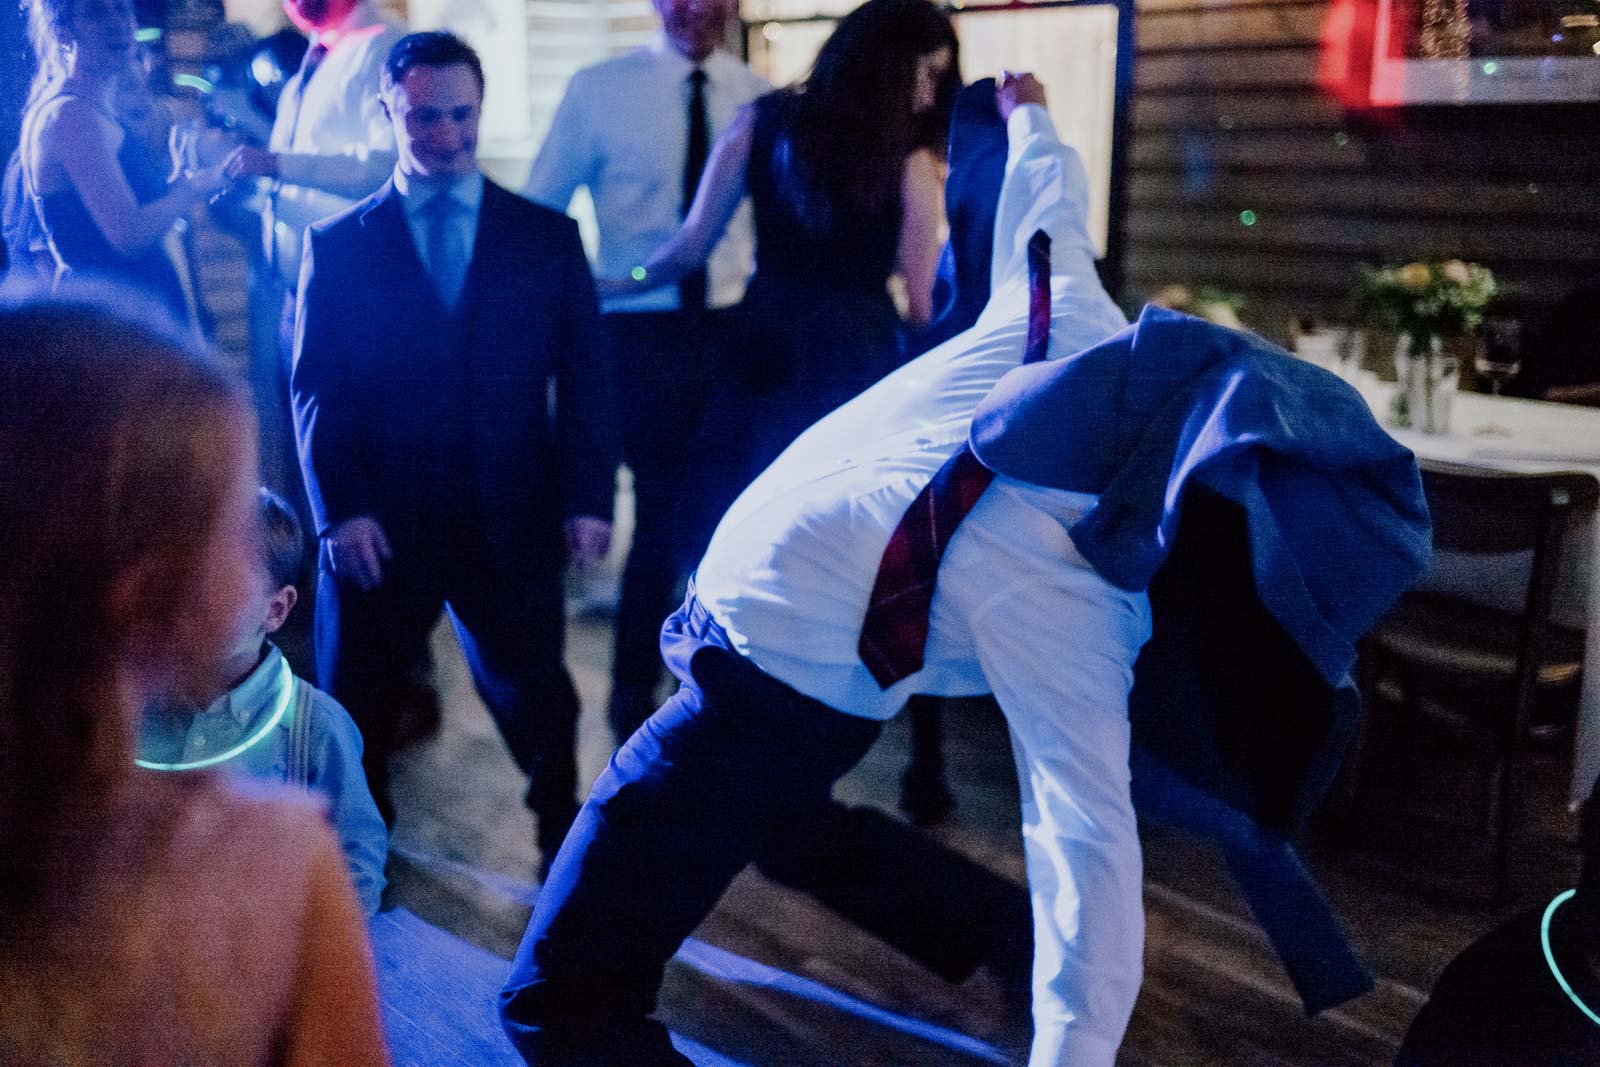 A guests bends back with his jacket over face at Ouisie's Table in Houston wedding reception